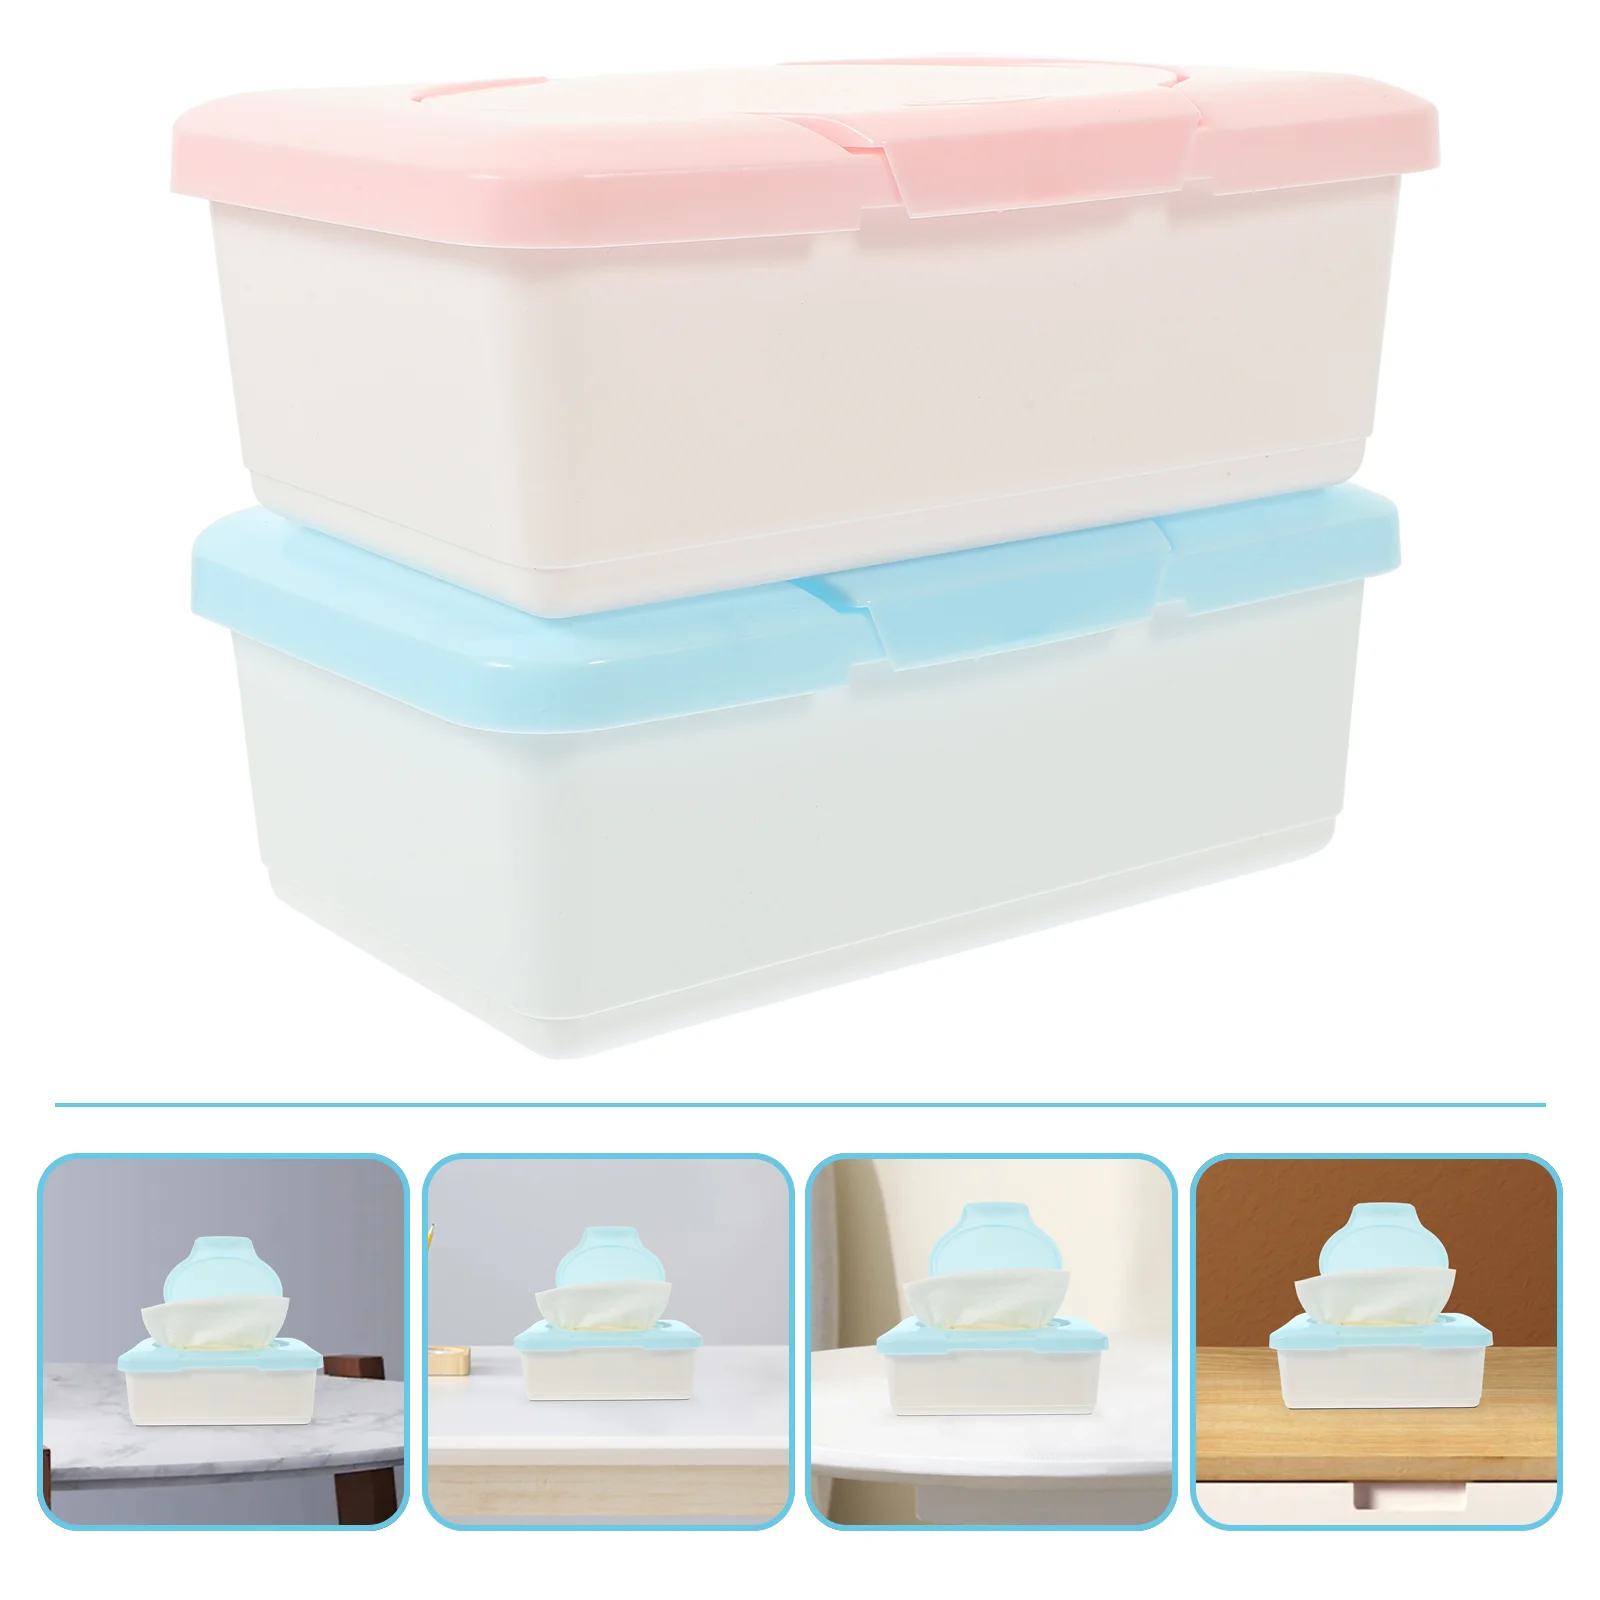 

2 Pcs Rag Rack Handheld Wipe Dispenser Refillable Wipes Container Holder Bathroom Baby Case Diapers Portable Baby wipes warmer